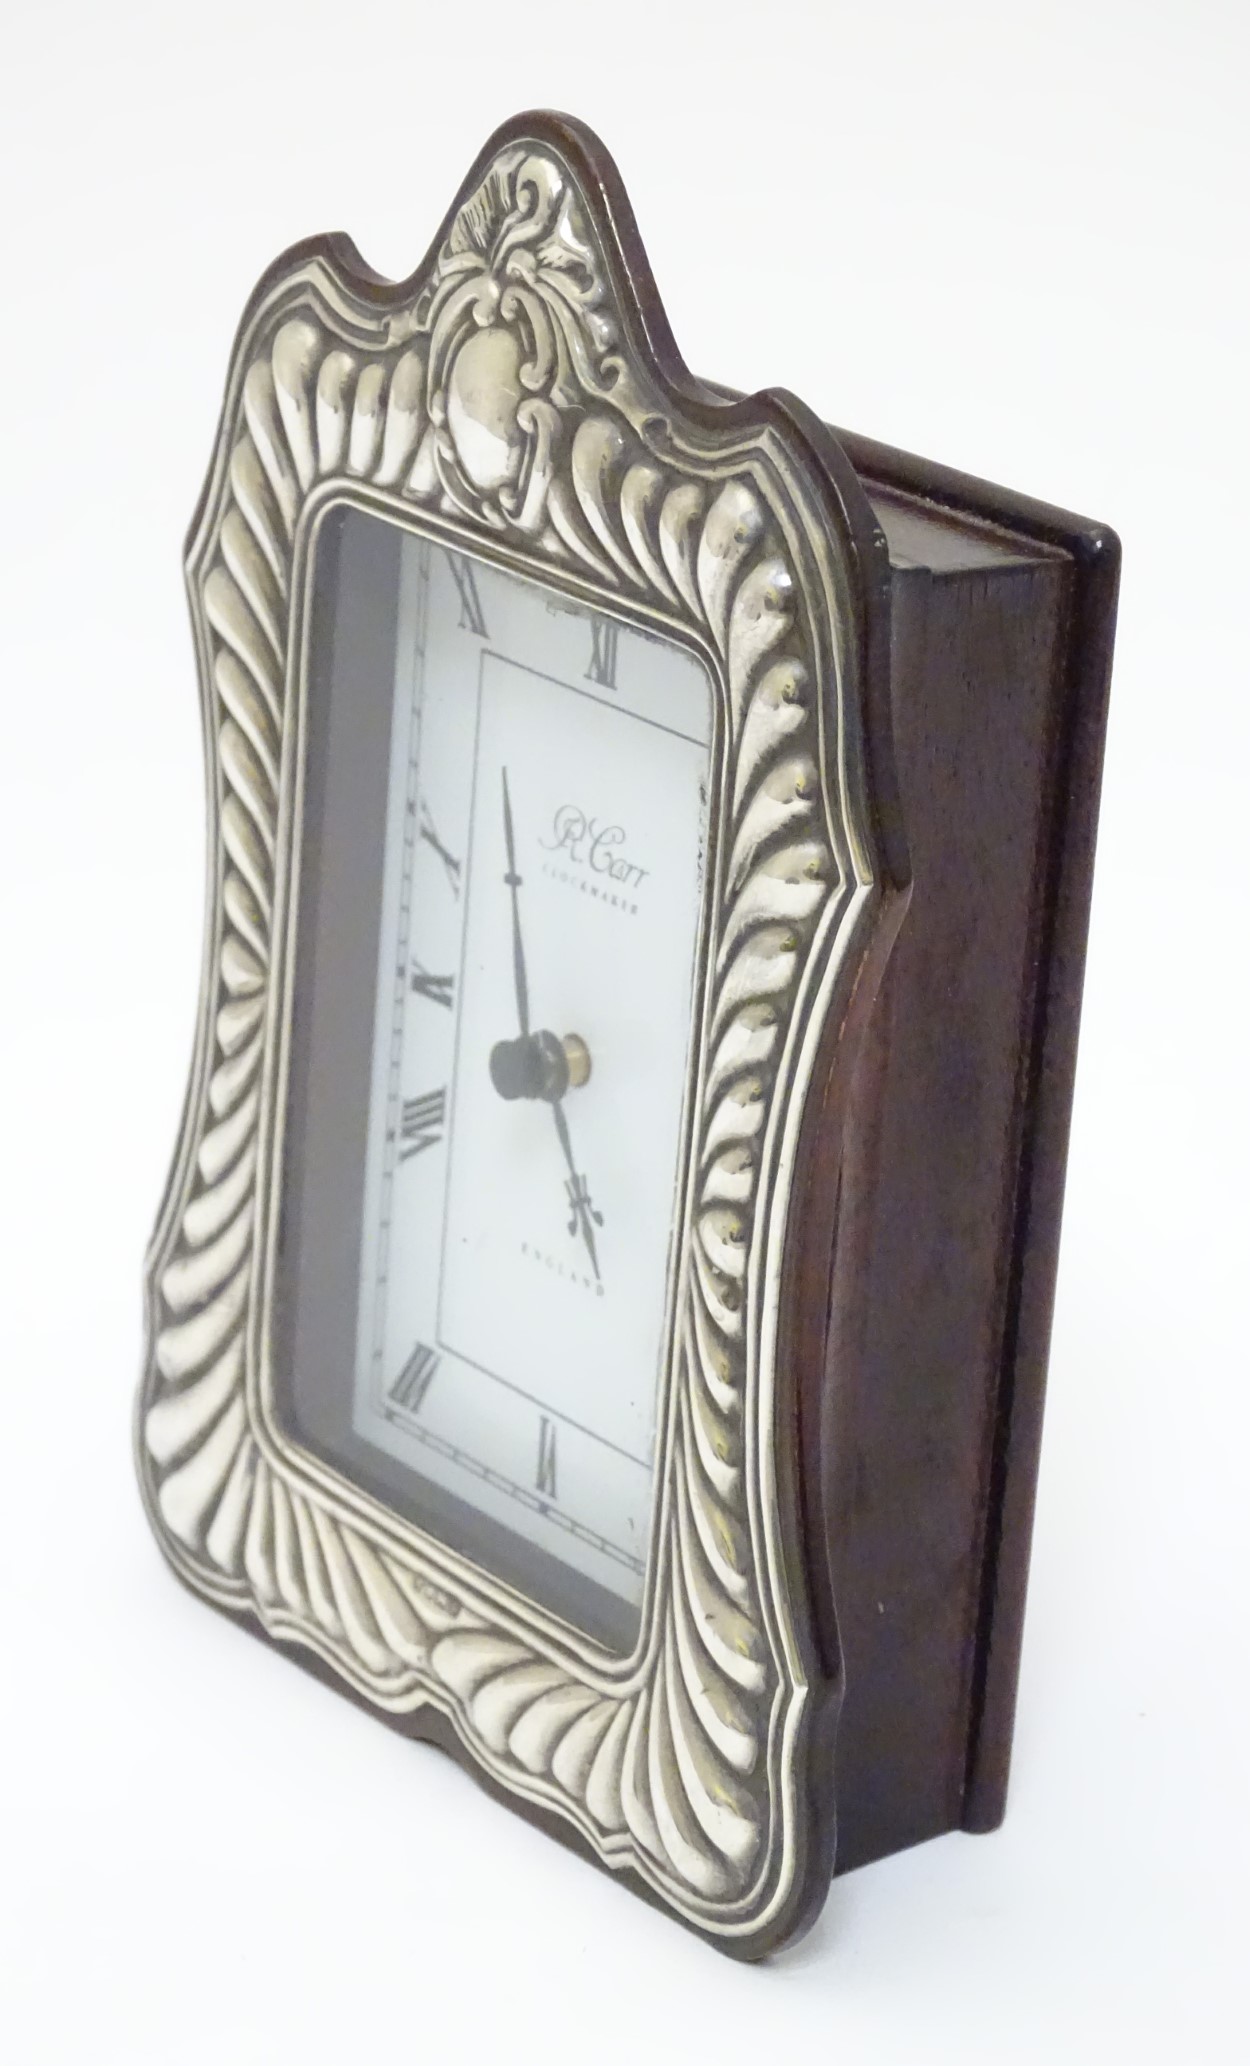 A small wooden cased mantle clock with silver surround hallmarked Sheffield 1989 maker Carrs of - Image 4 of 6